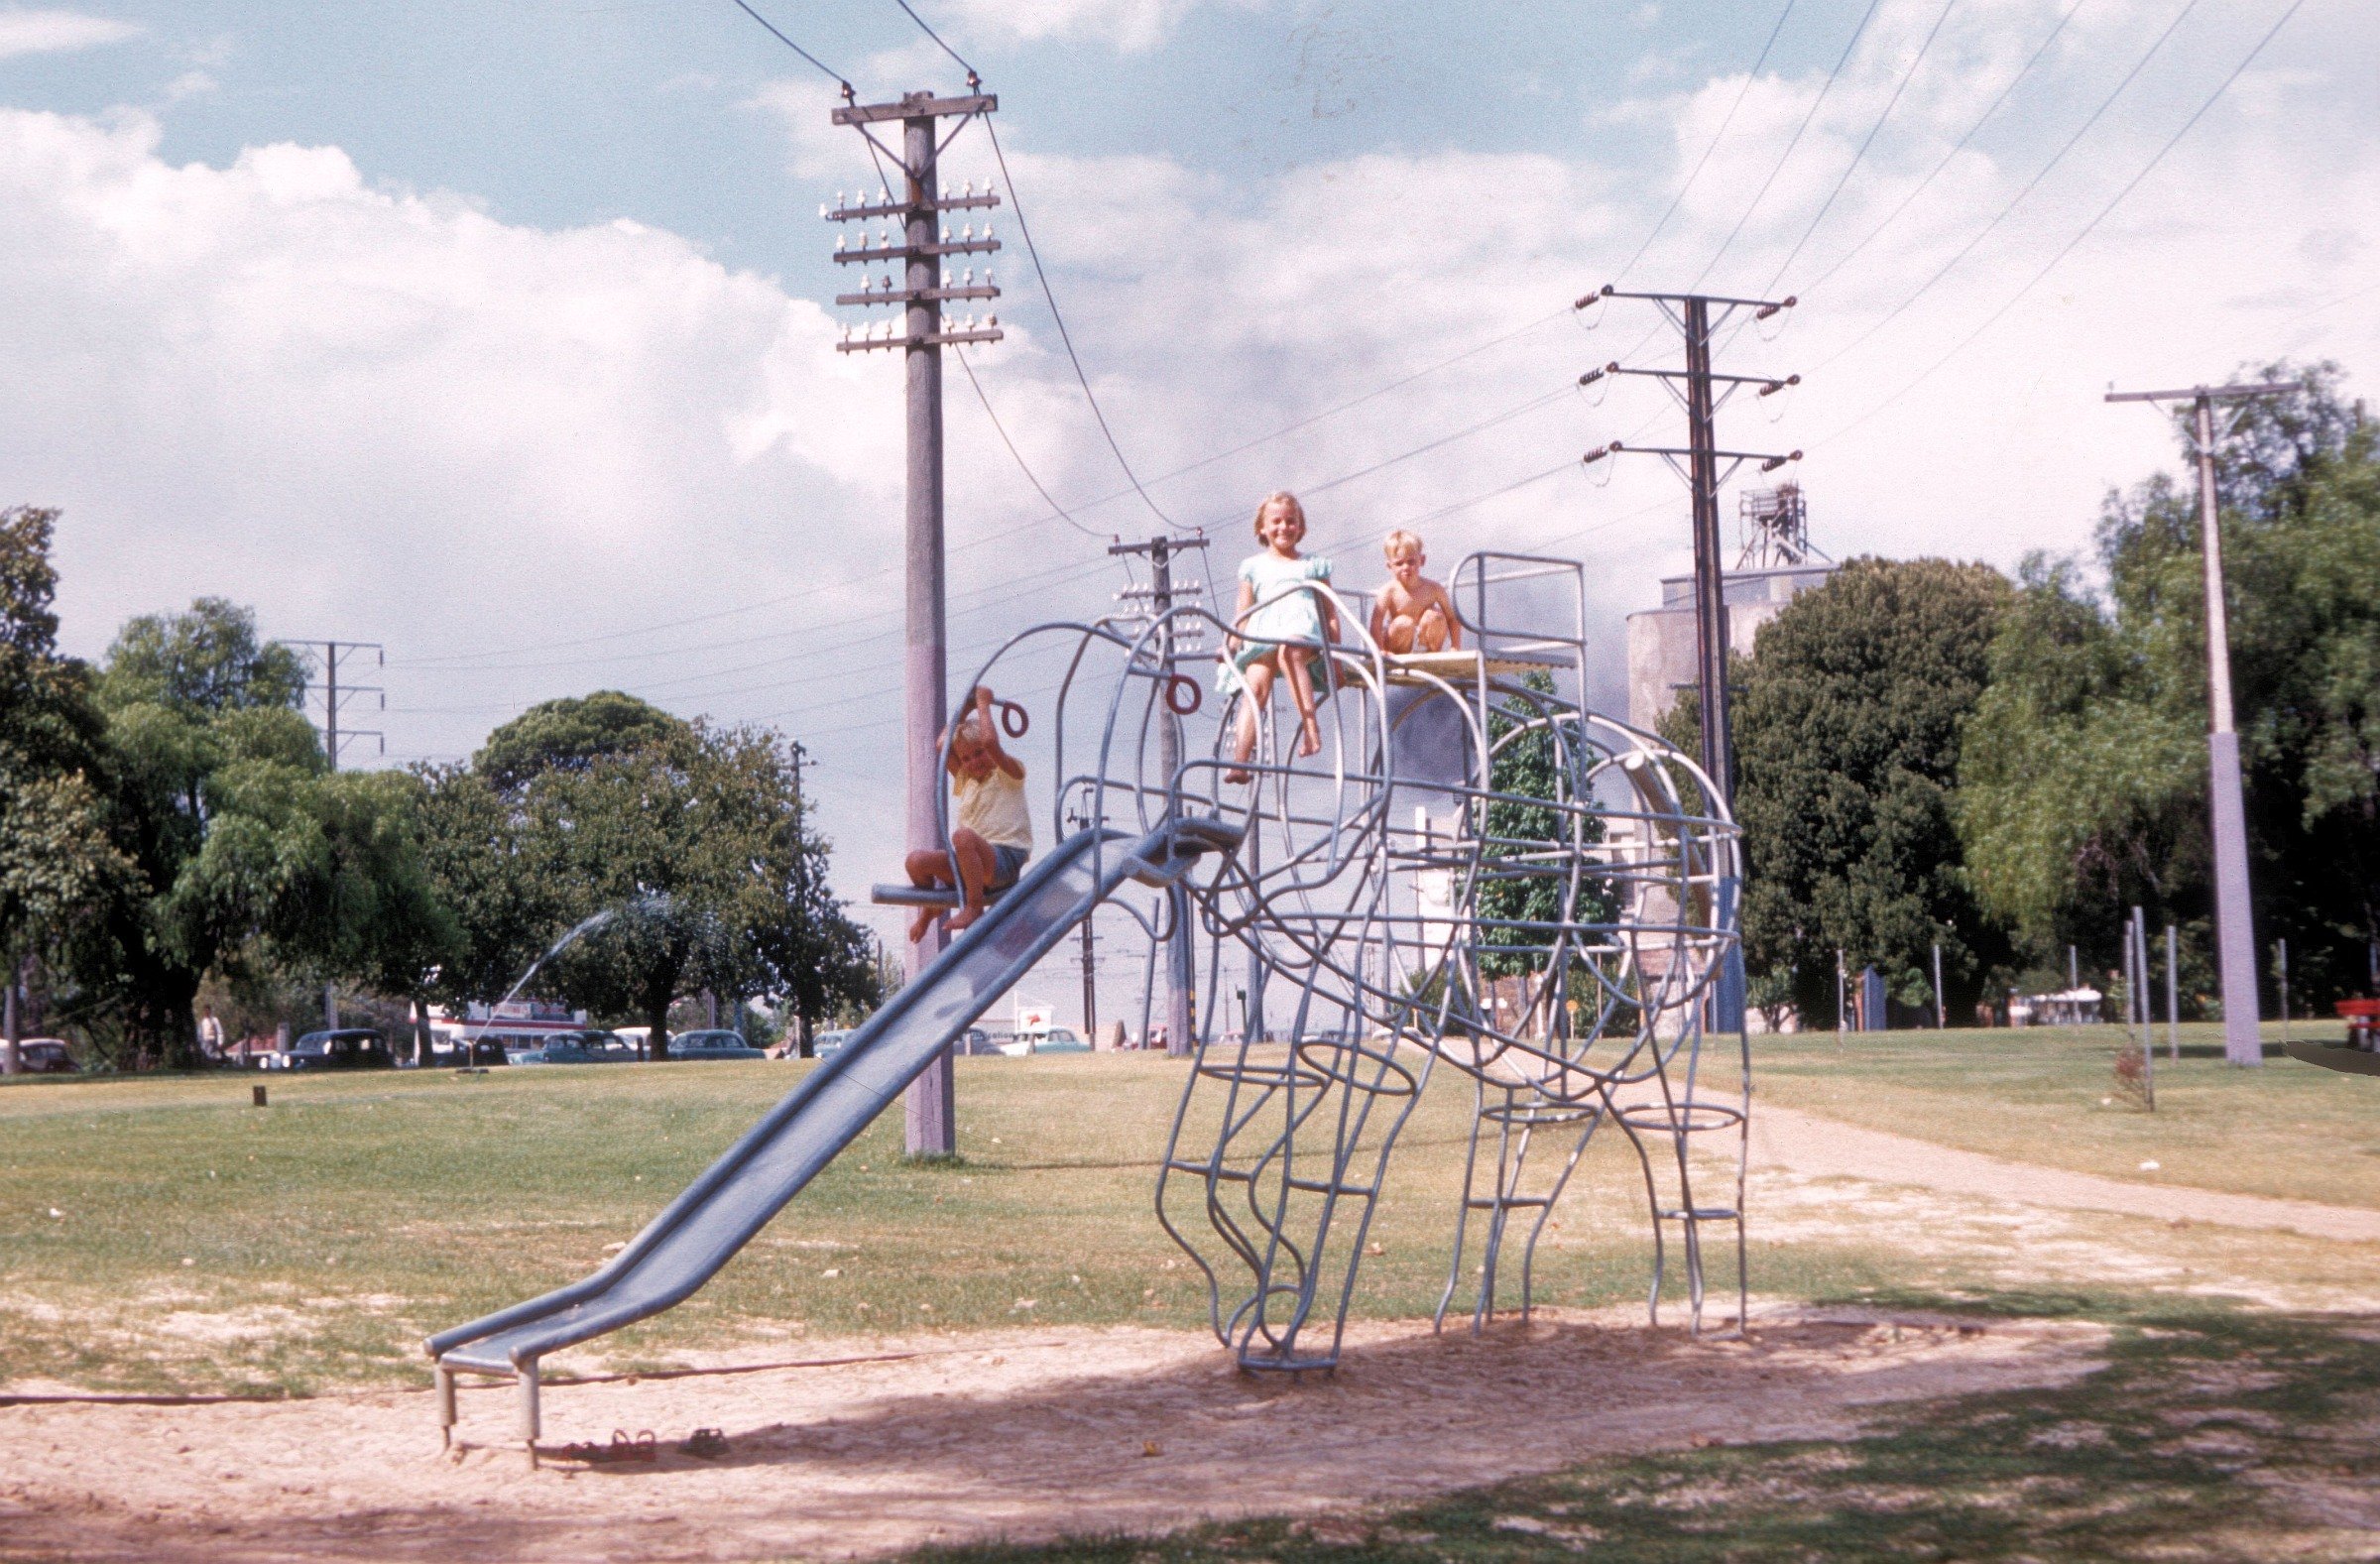 John, Dianne and Barry Christiansen enjoying the brand new elephant climbing frame in Rymill Park, early 1961